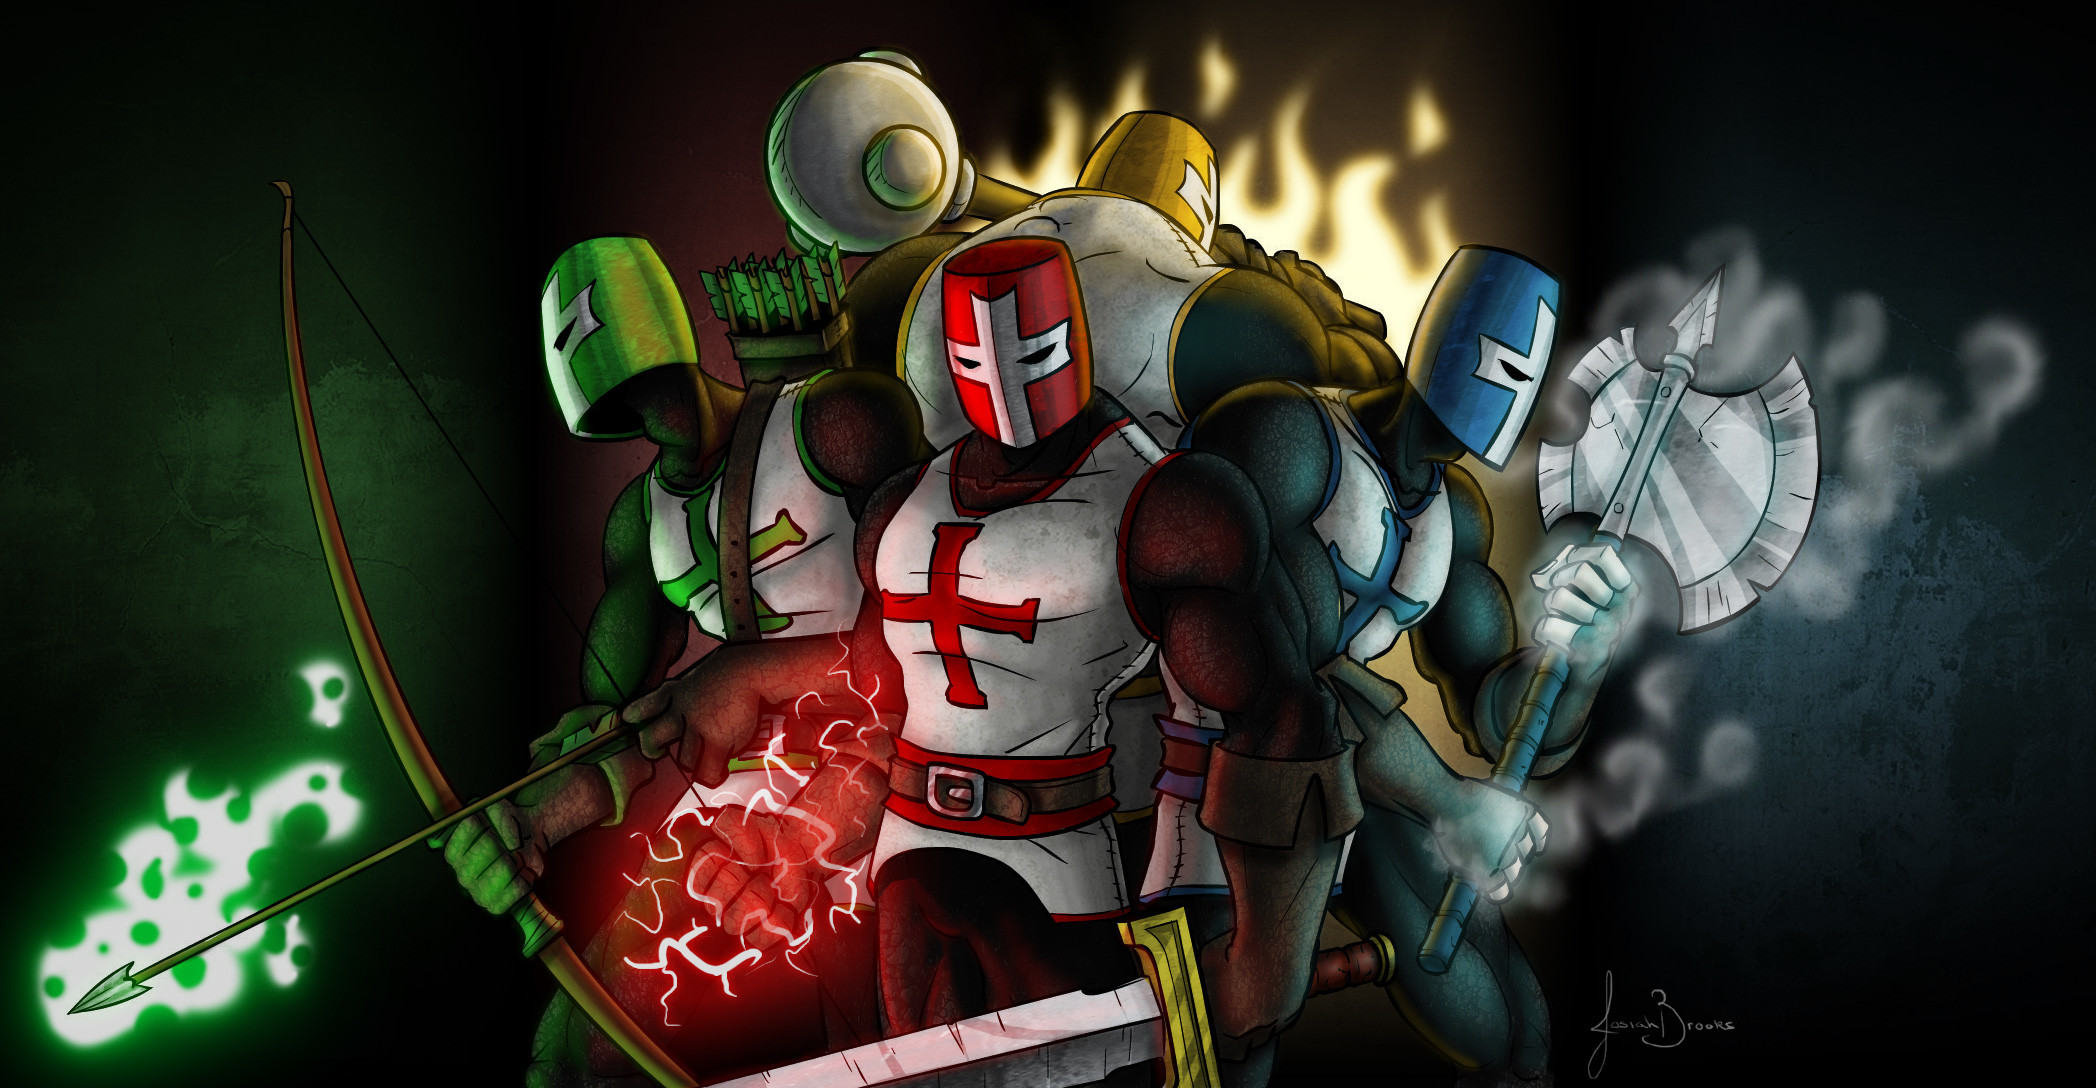 2096x1088 Download Wallpaper 1920x1080 Castle crashers, Characters, Arm ..